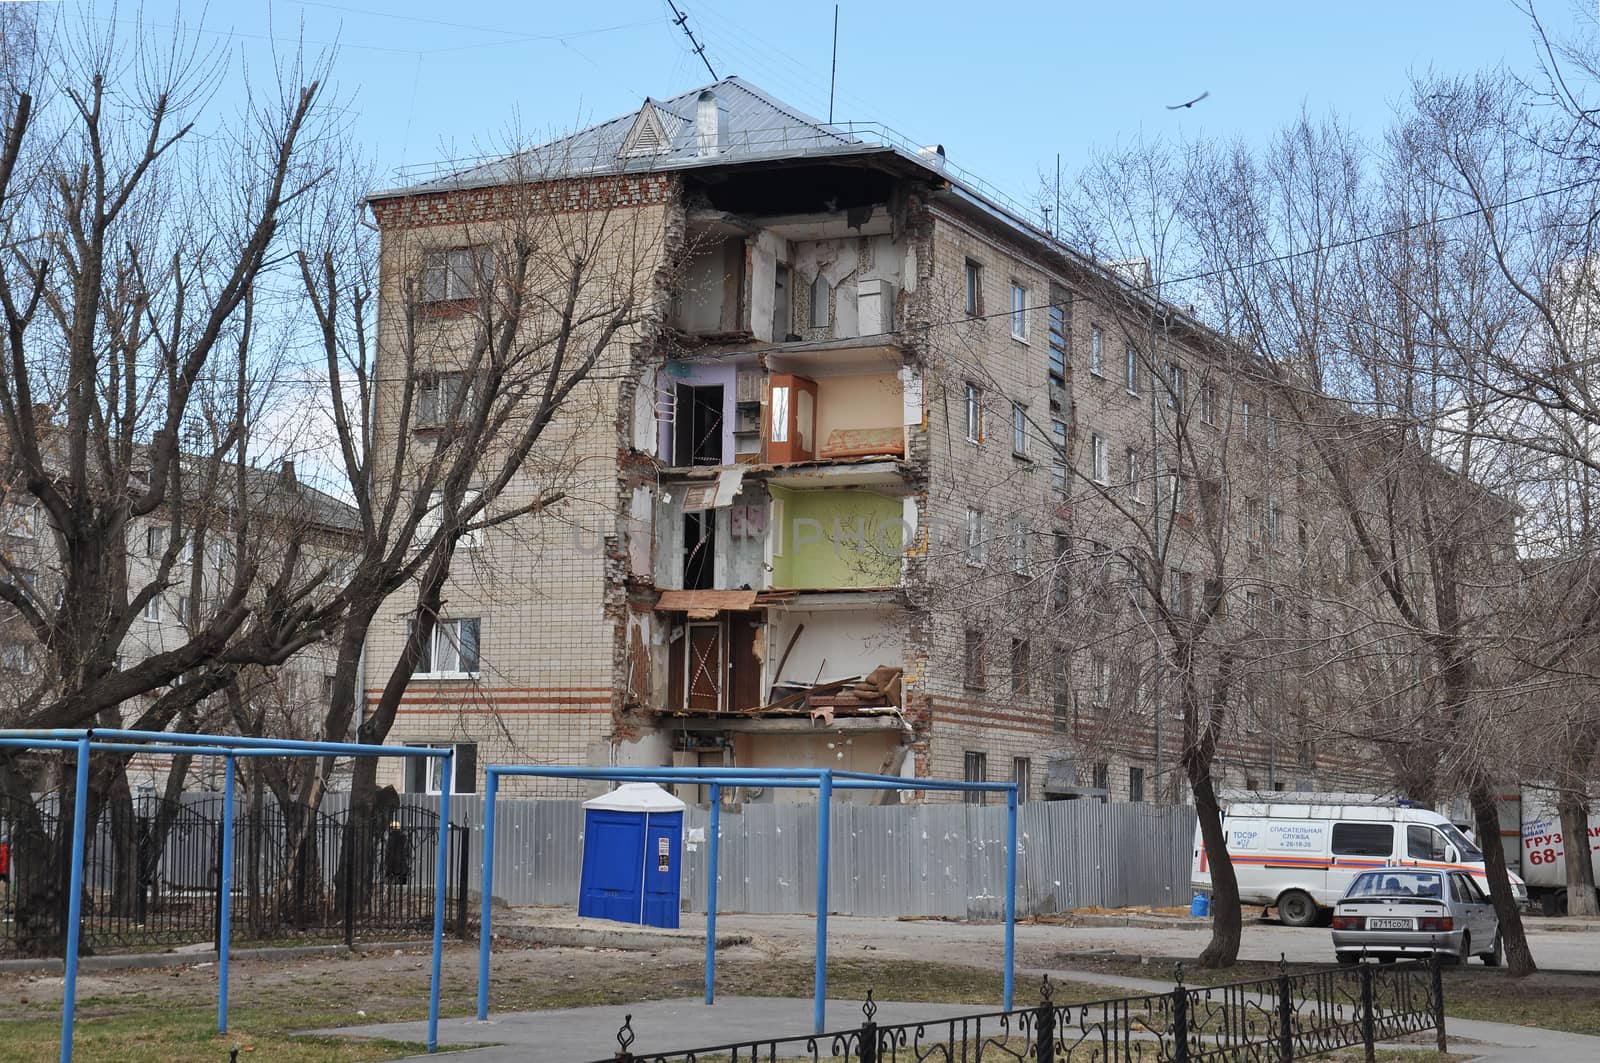 Collapse of a corner of the inhabited five-floor house. Tyumen, Russia